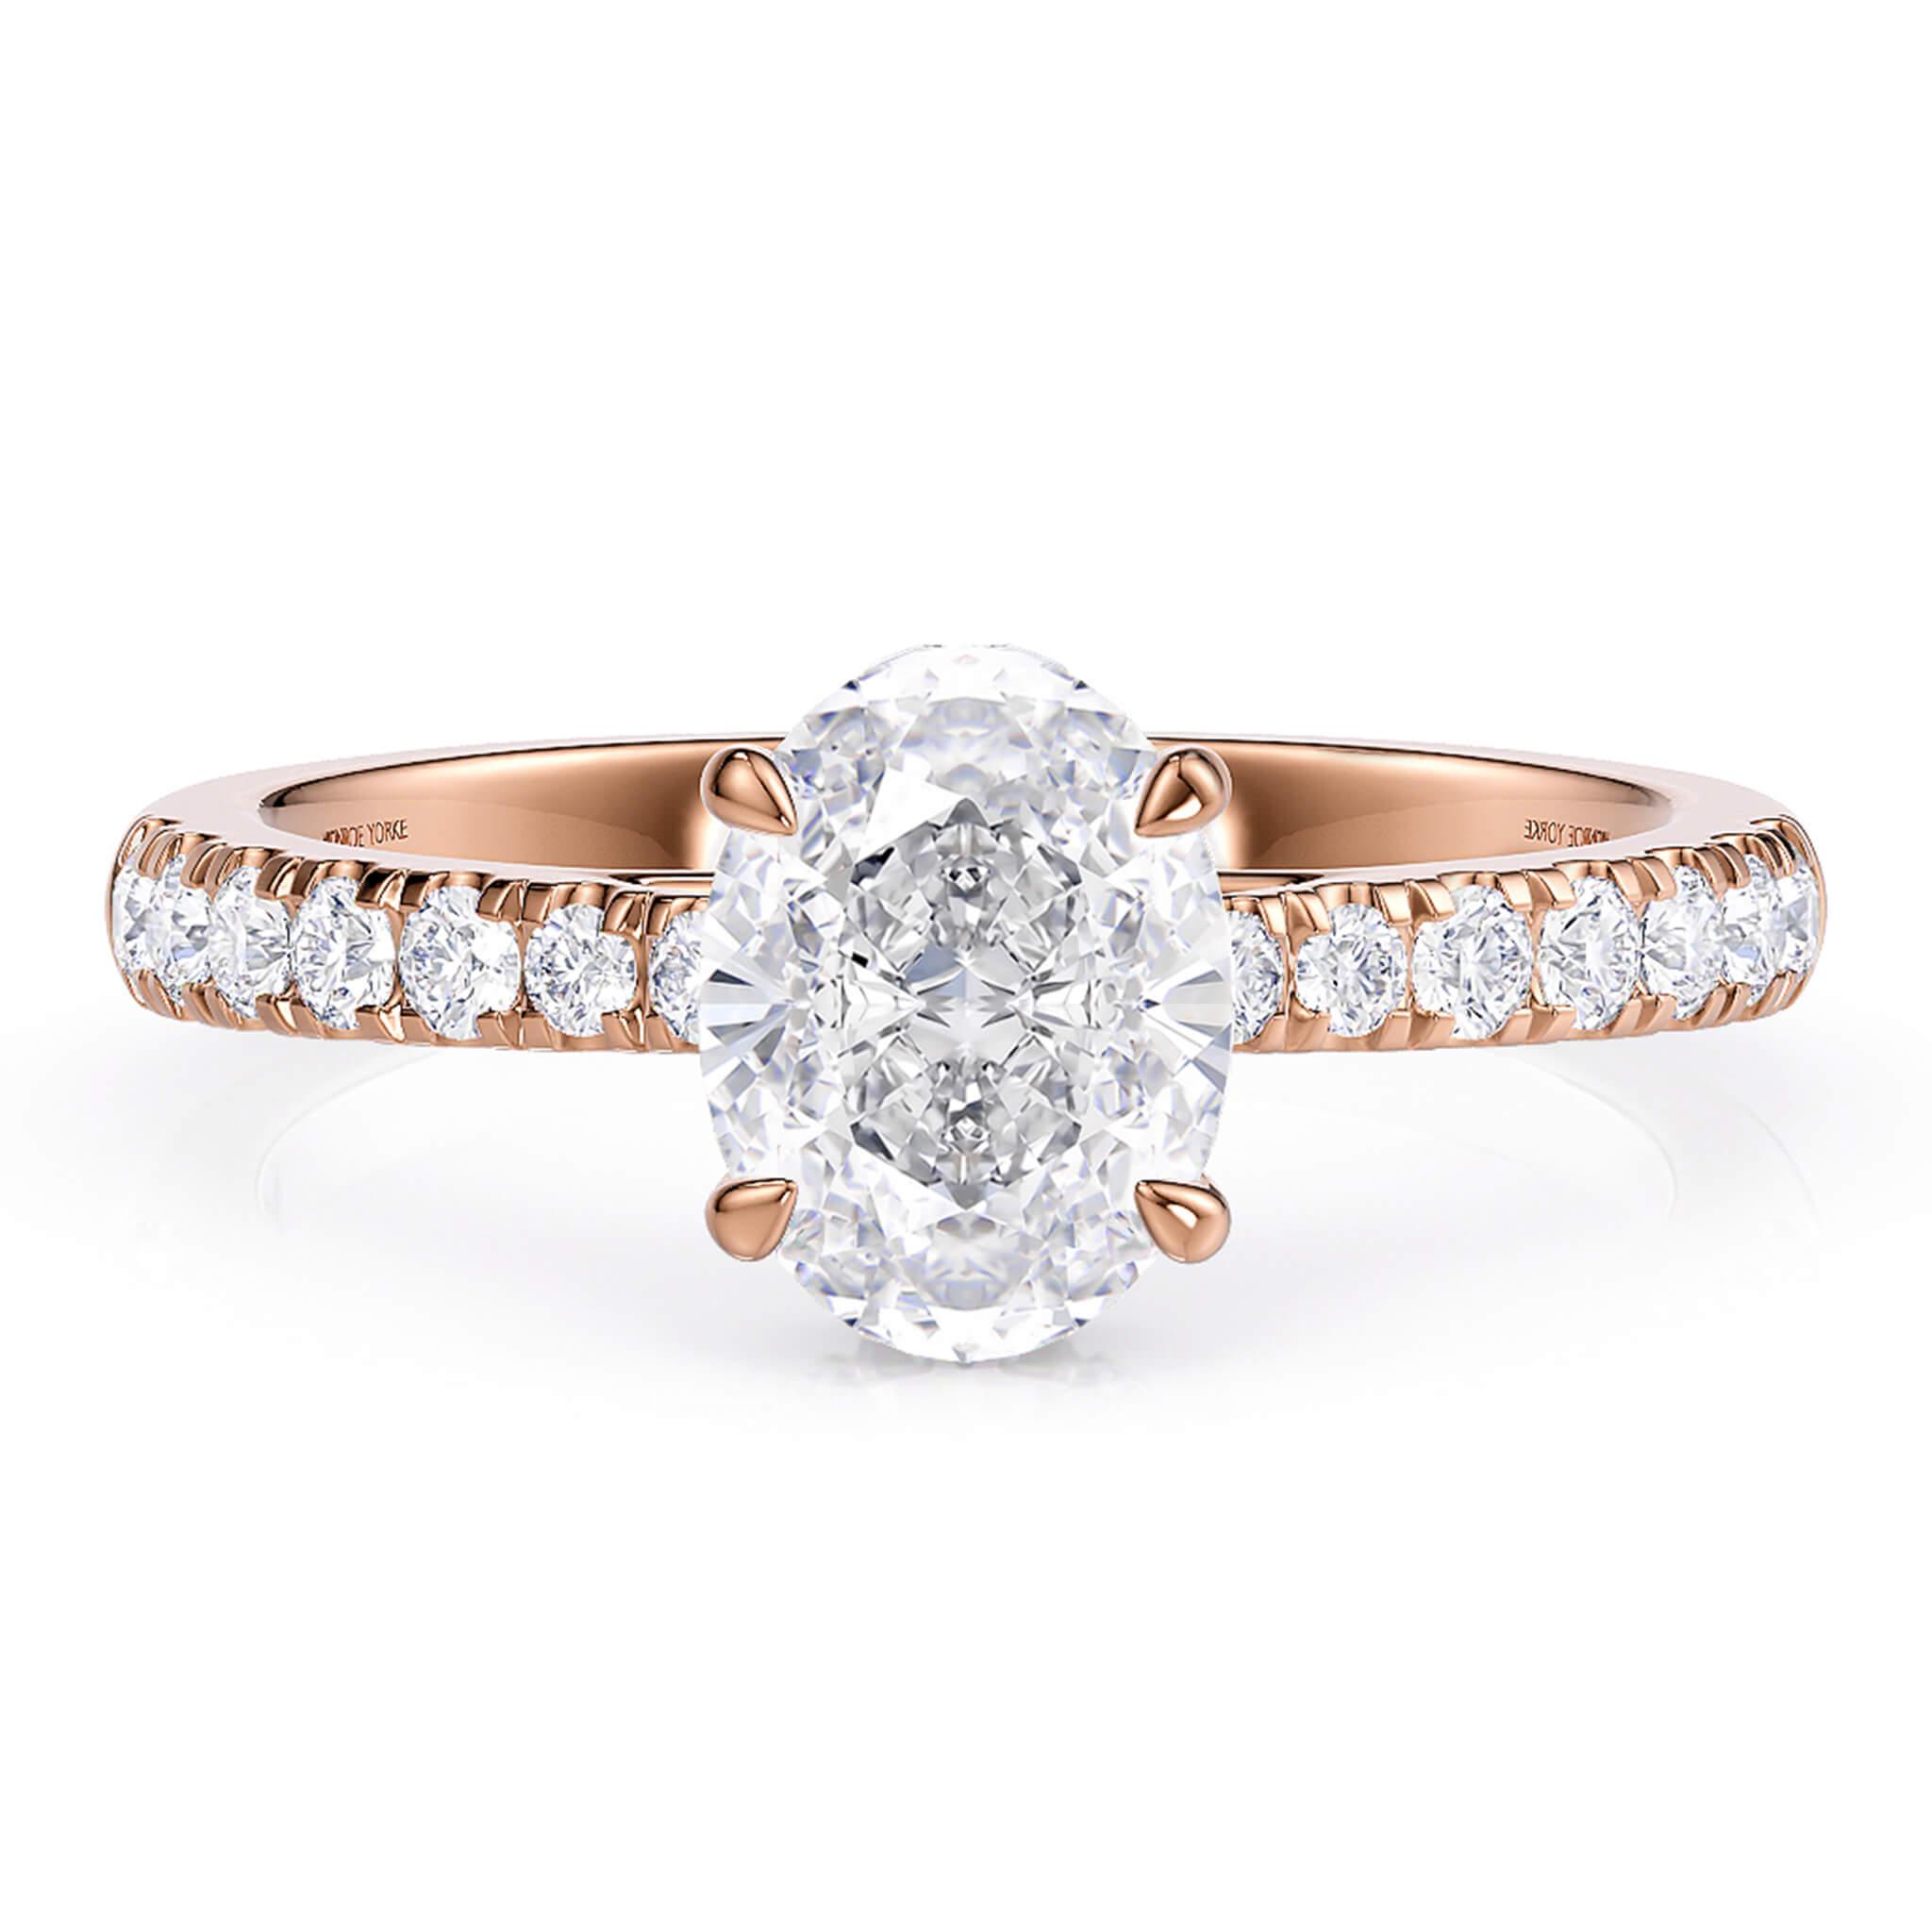 Paige Oval diamond ring. Band tapers into the centre setting. 